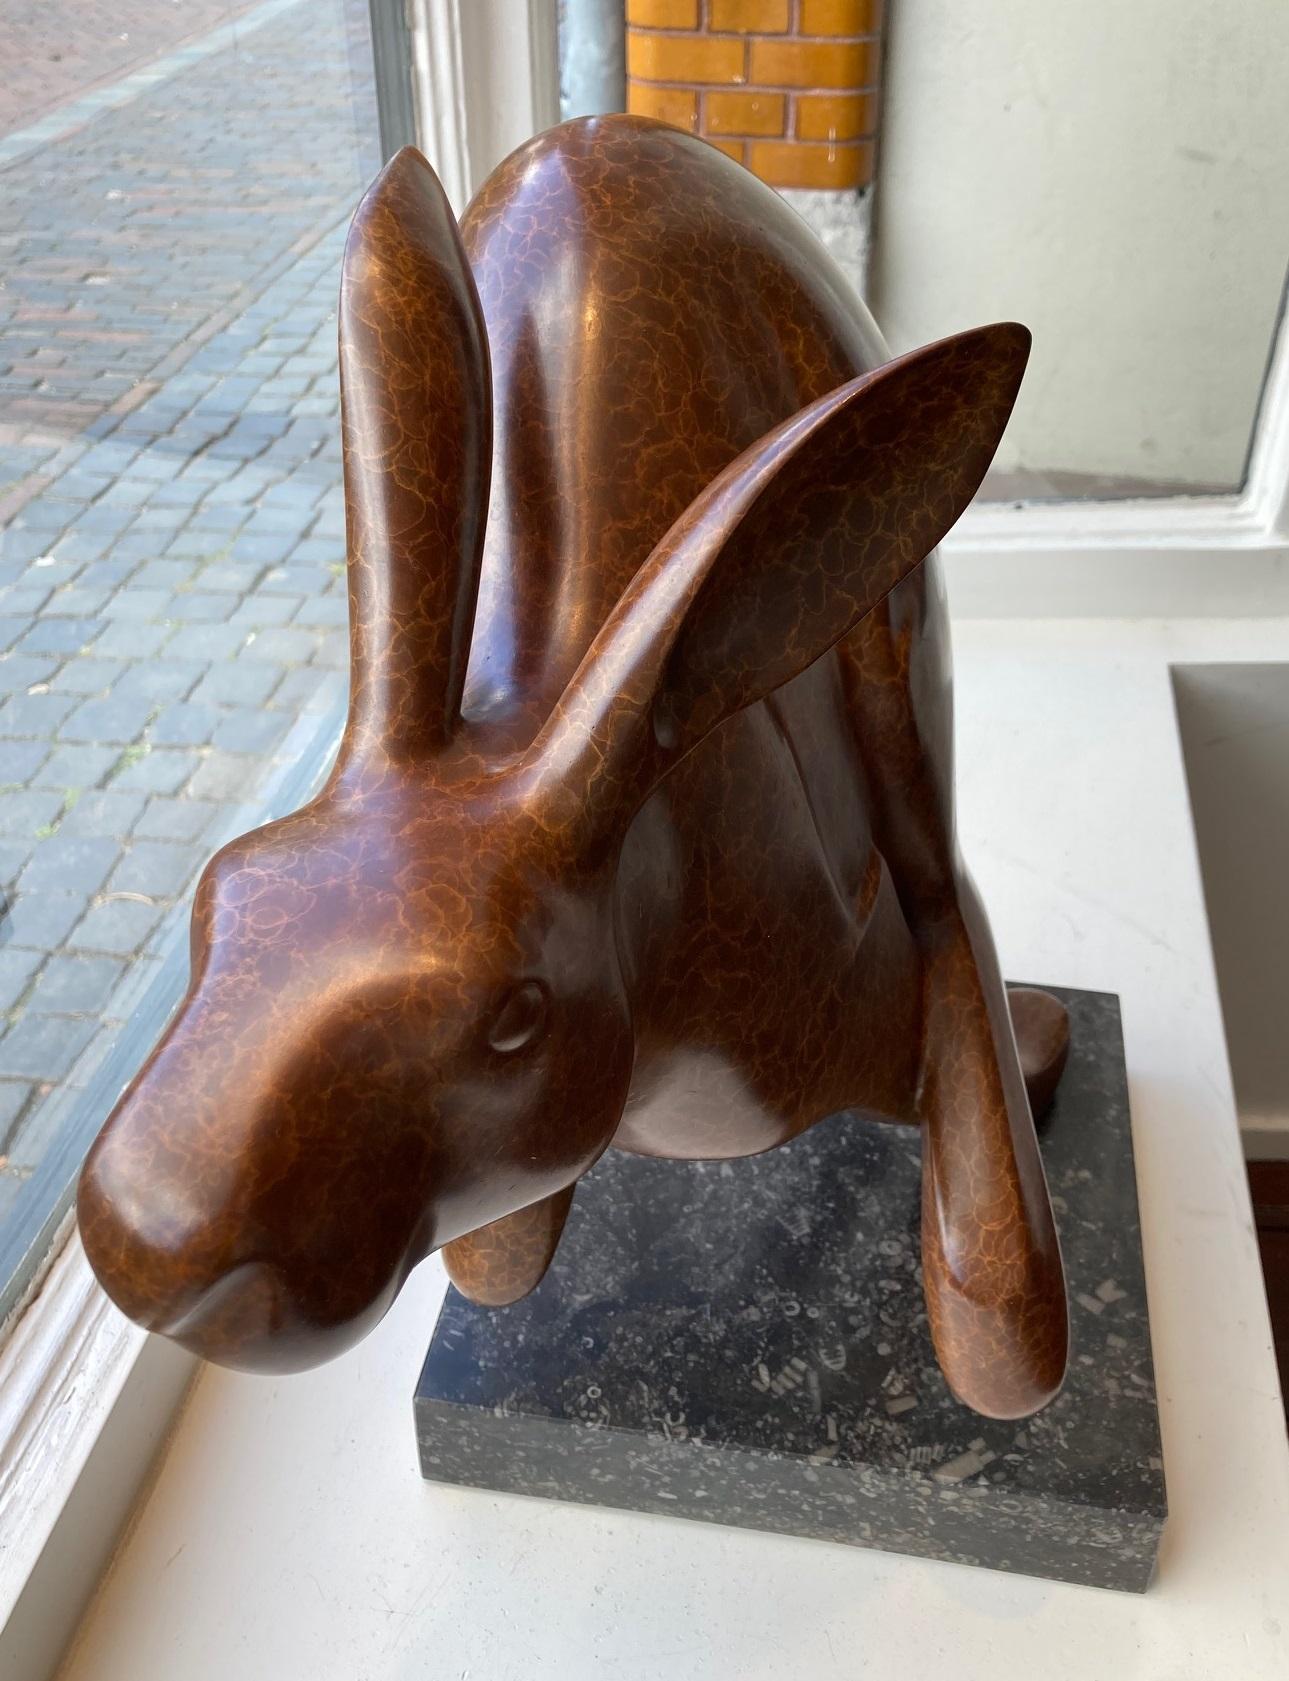 Rennende Haas no. 3 Running Hare Bronze Sculpture Animal Contemporary In Stock For Sale 1